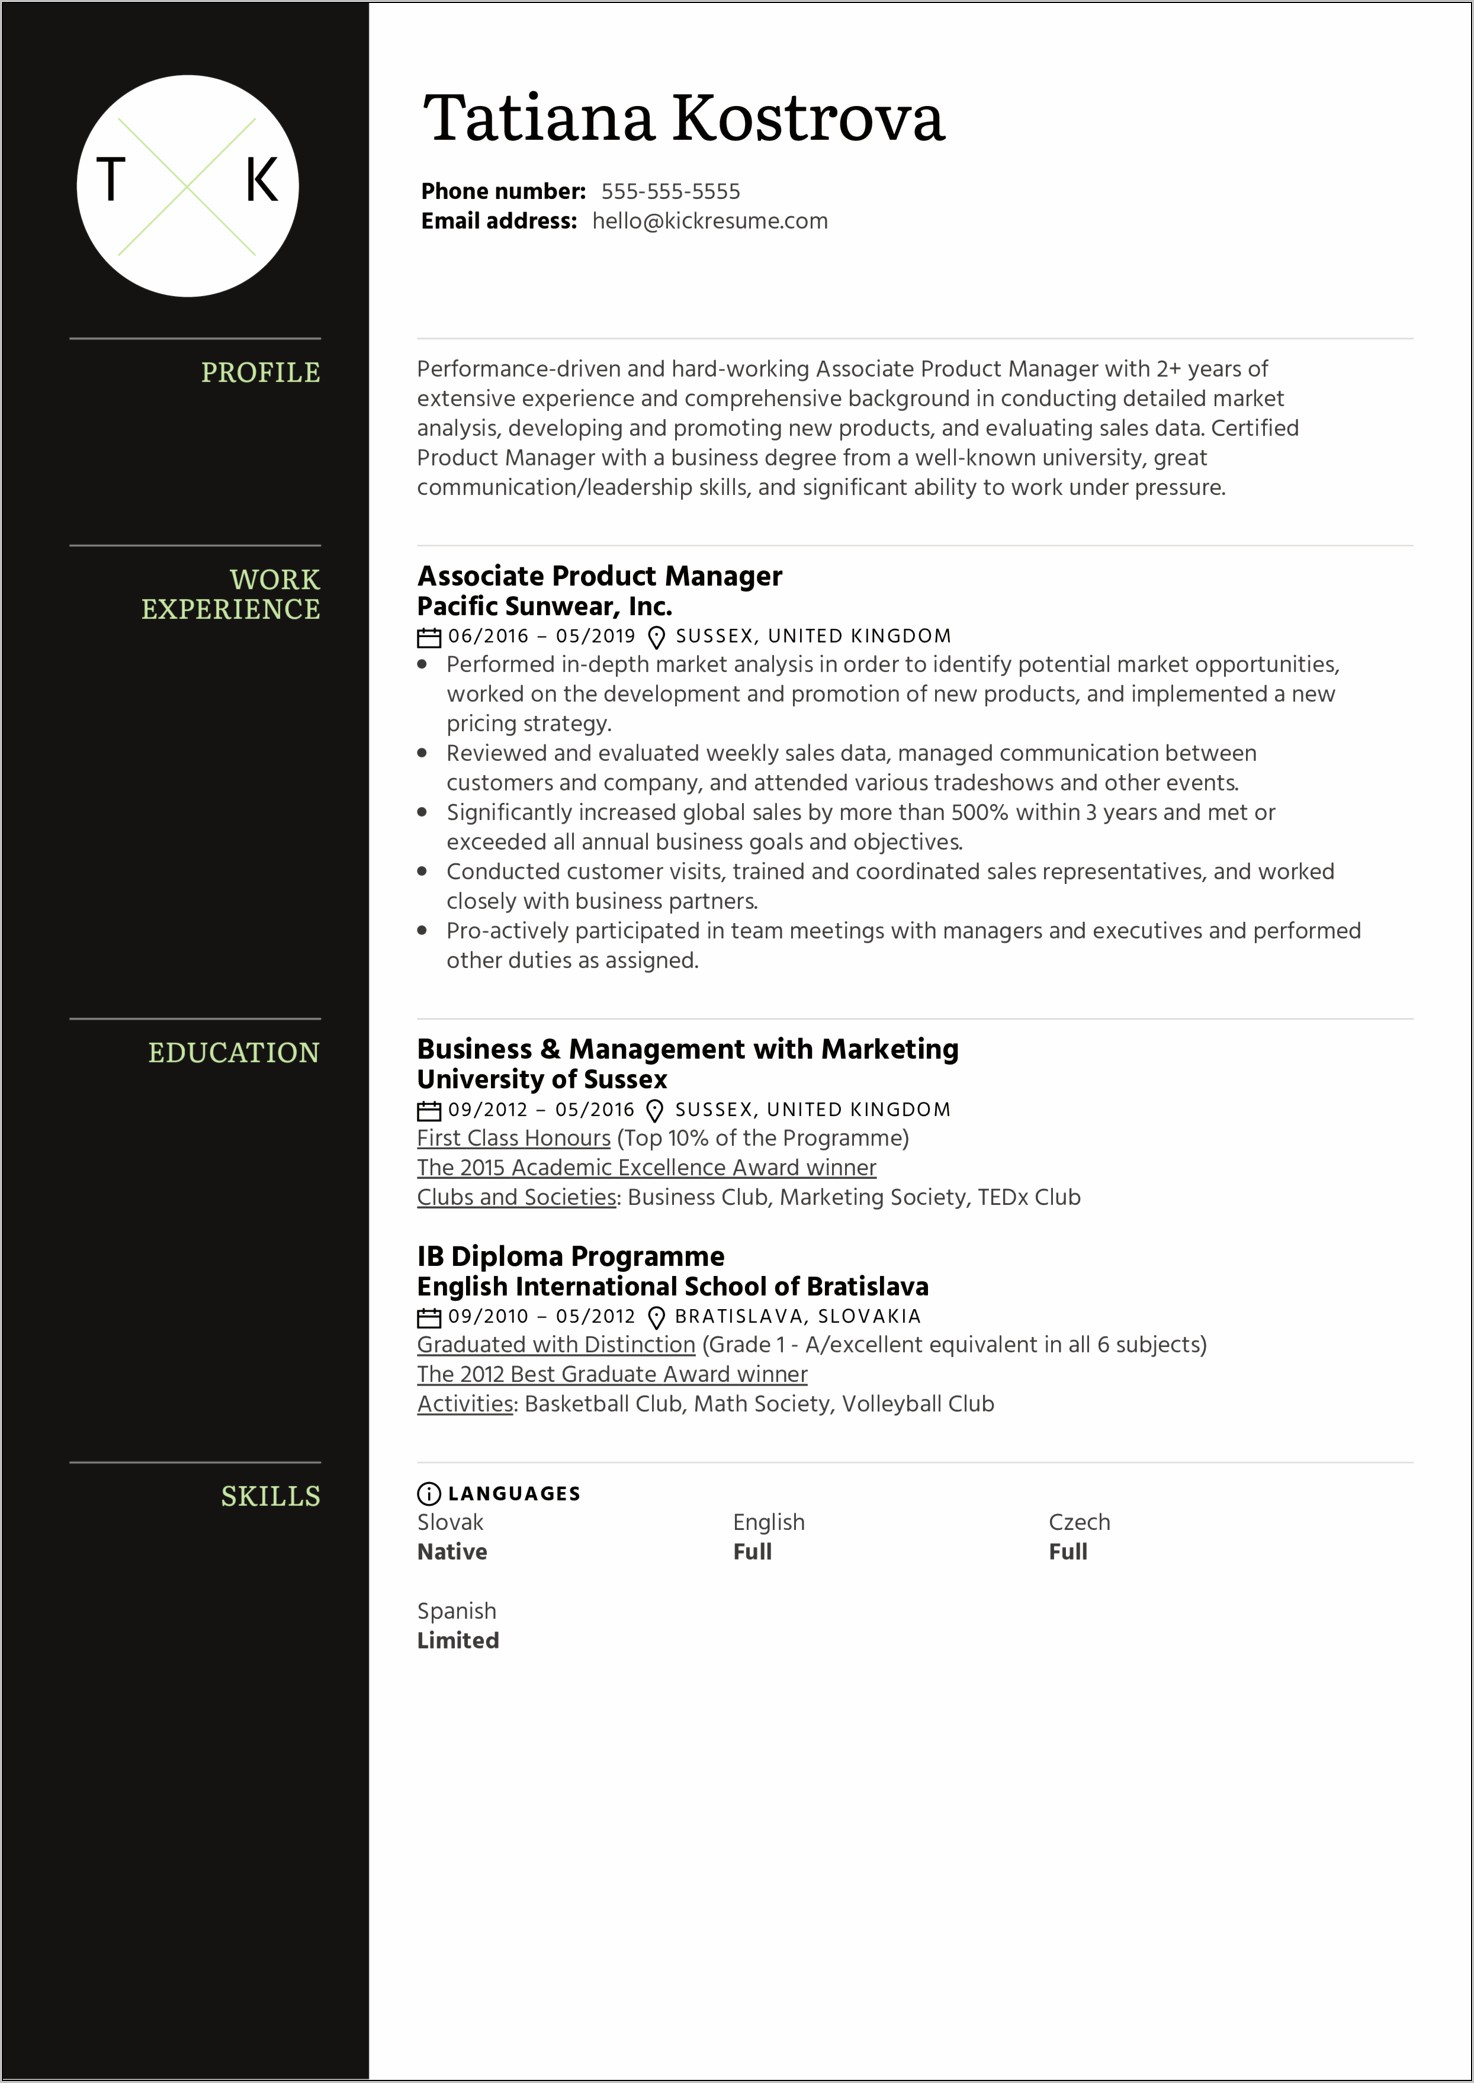 Resume For Manager Of Small Business